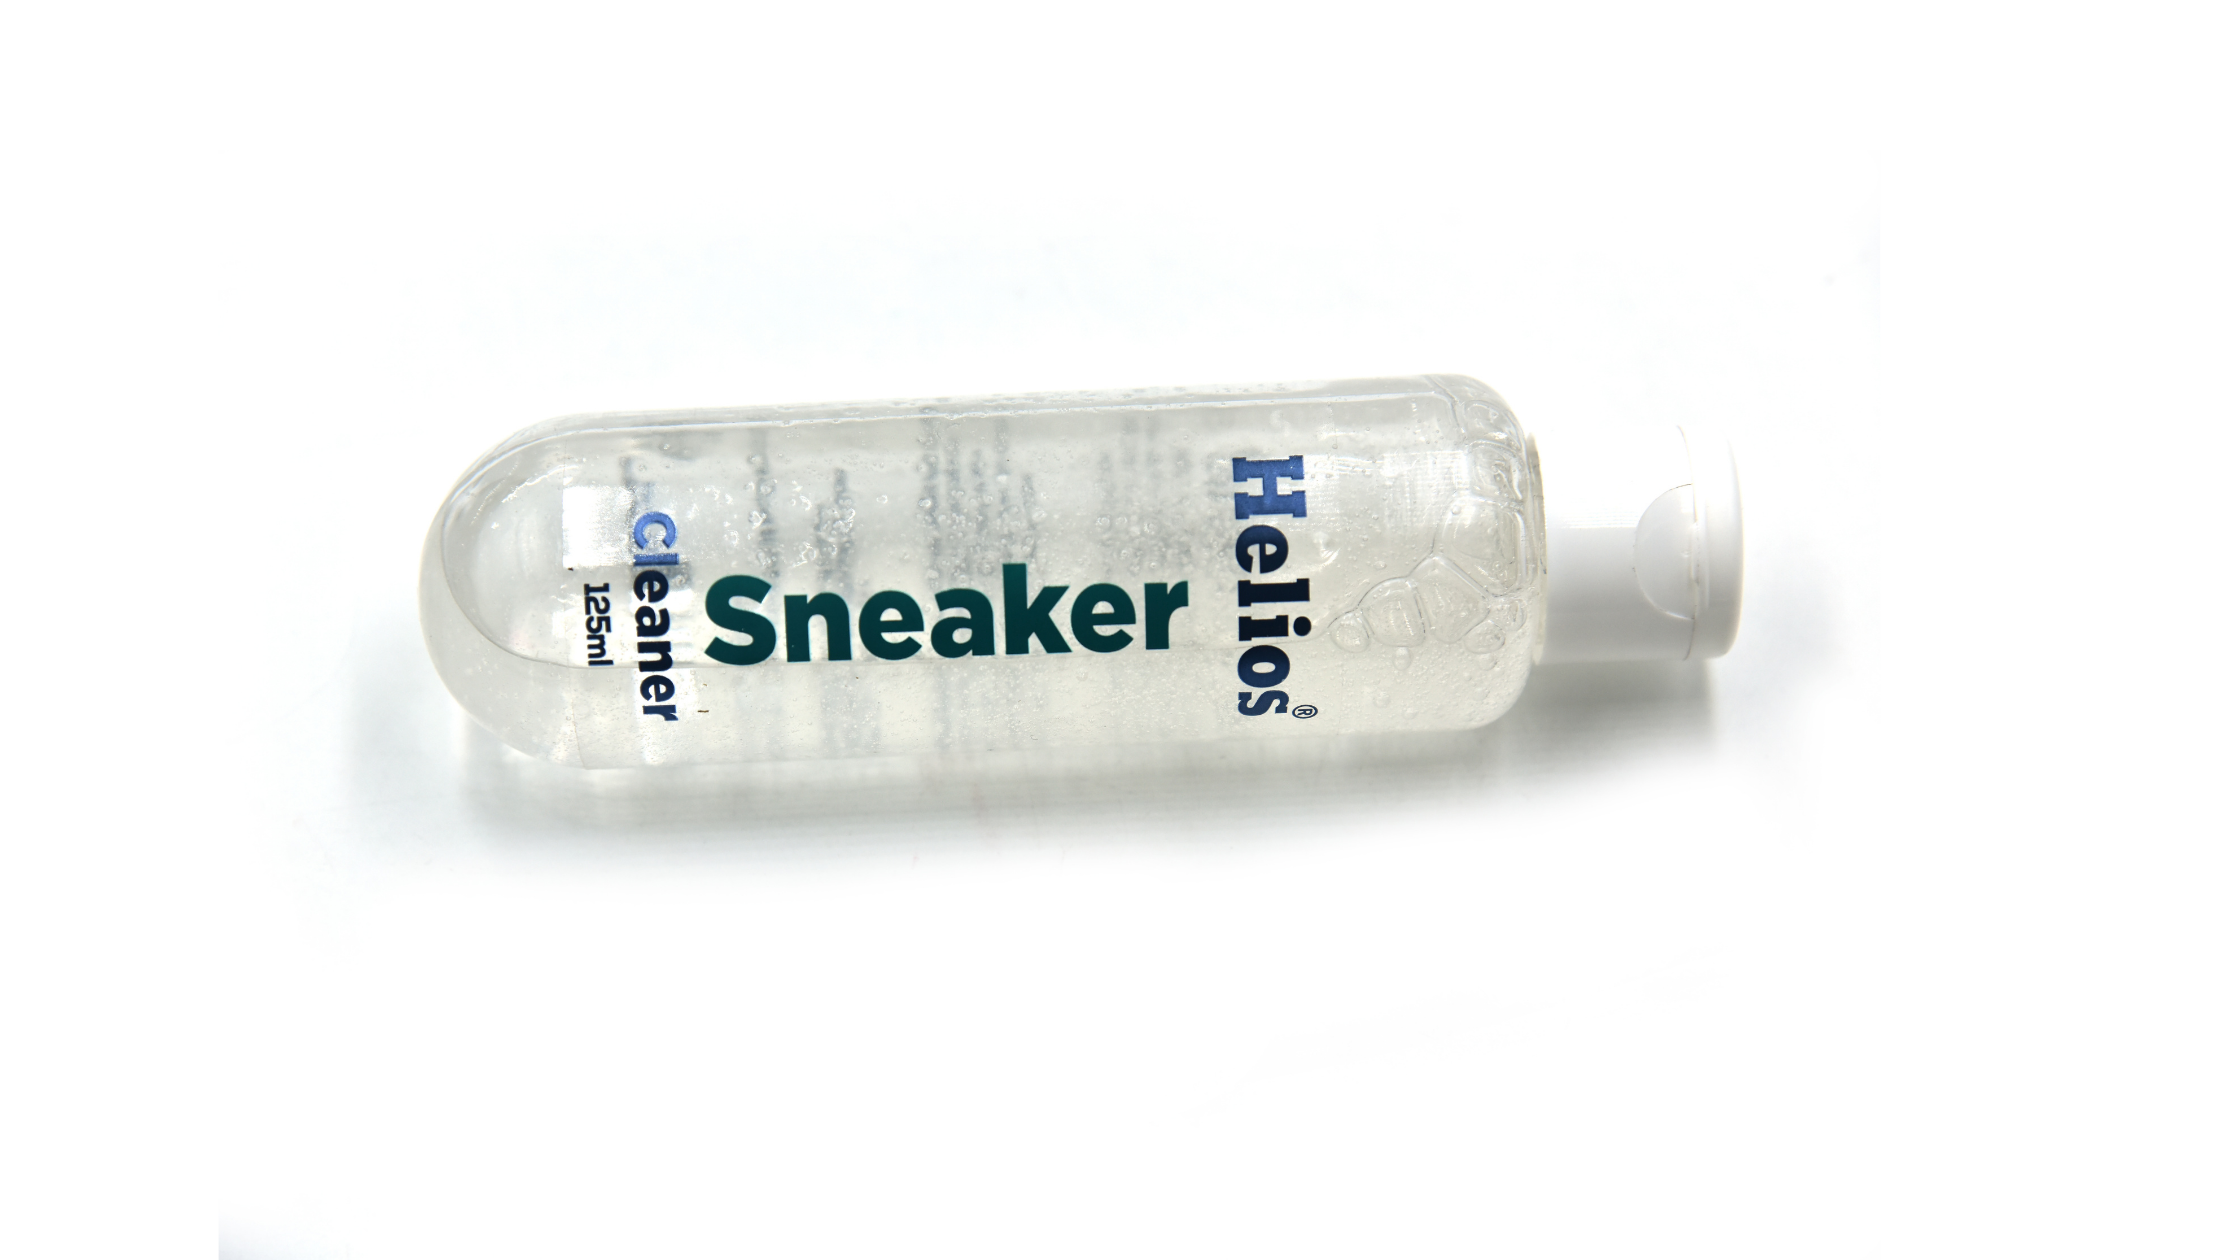 Sneakers getting complex, cleaning getting easy with super sneaker cleaner